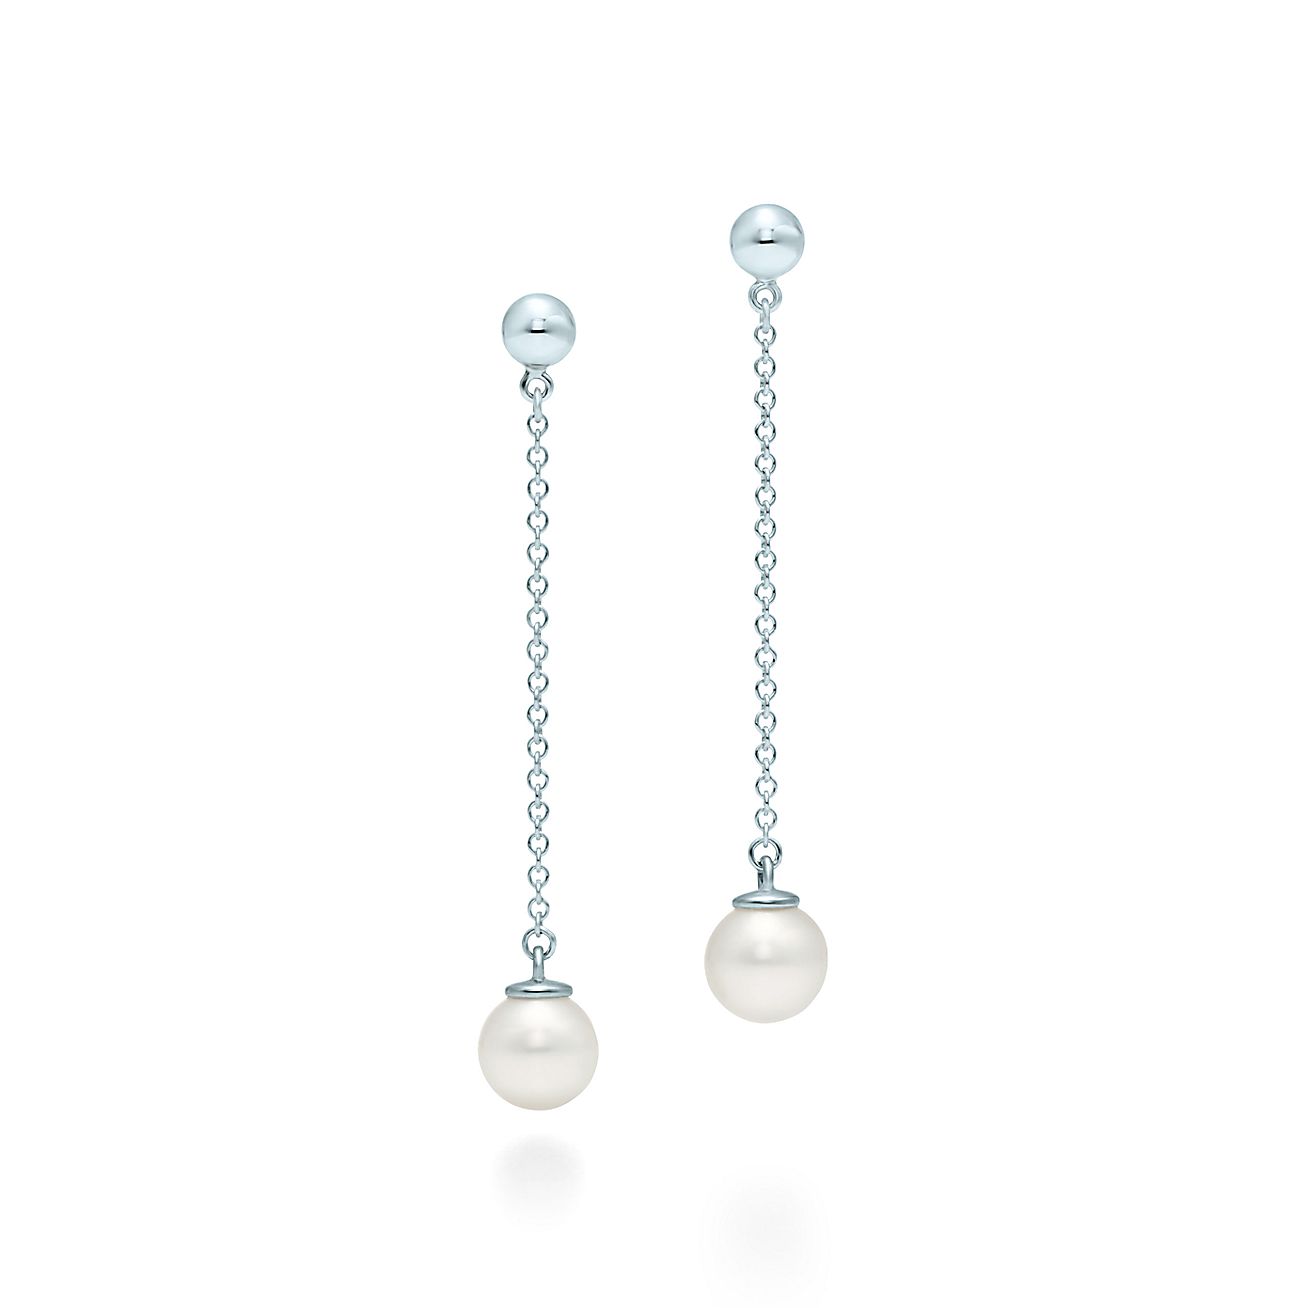 Ziegfeld Collection drop earrings in sterling silver with pearls. | Tiffany  & Co.